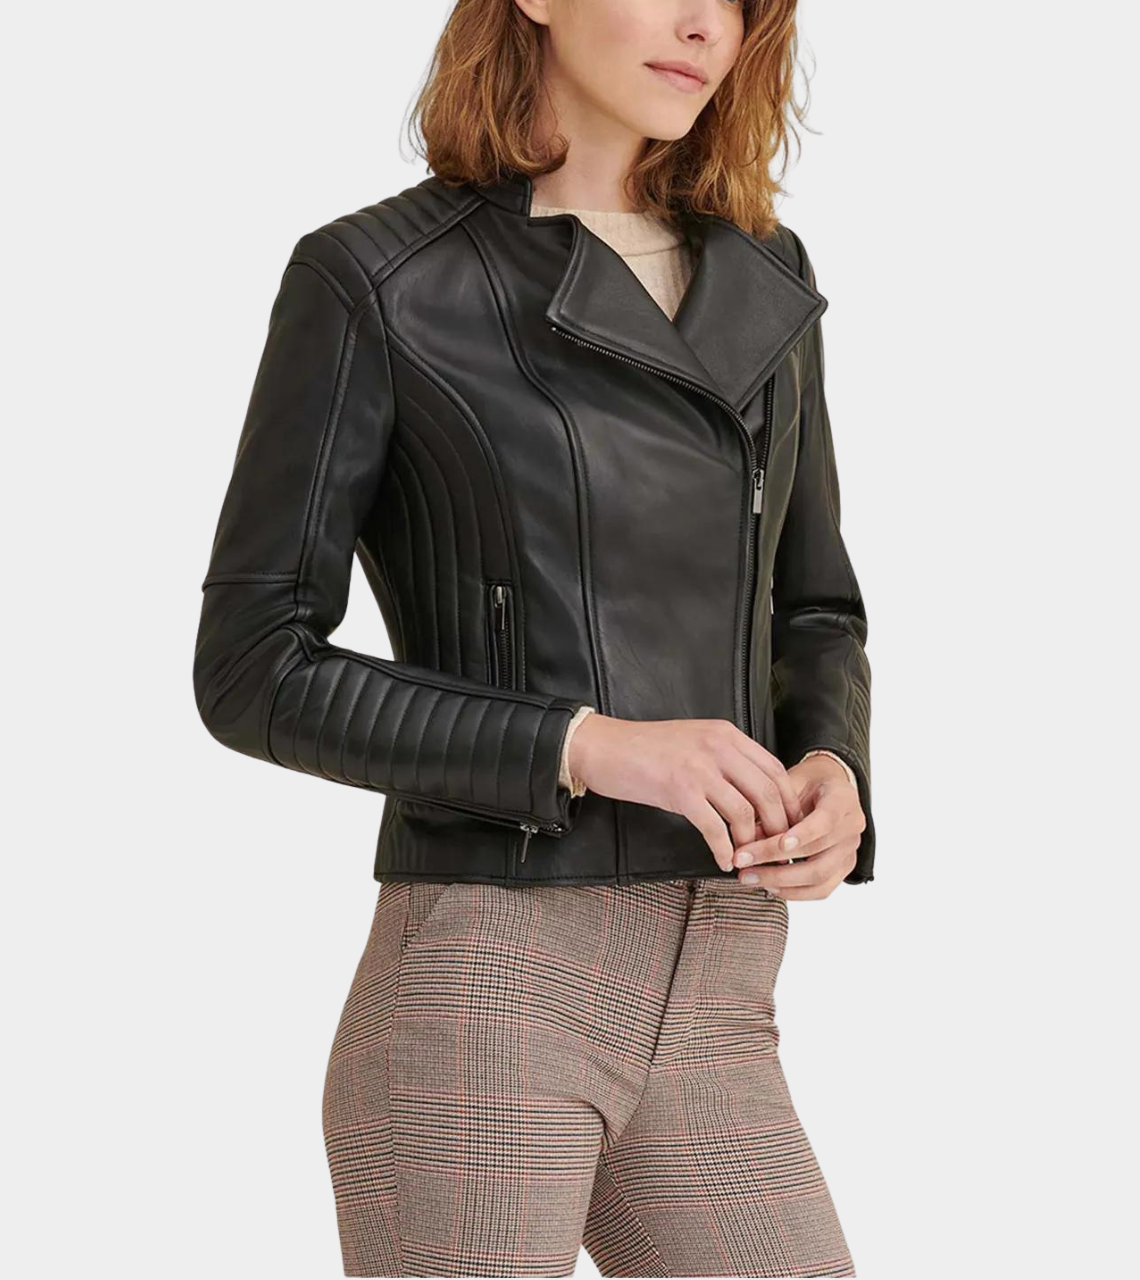 Ban Collar Leather Jacket For Women's